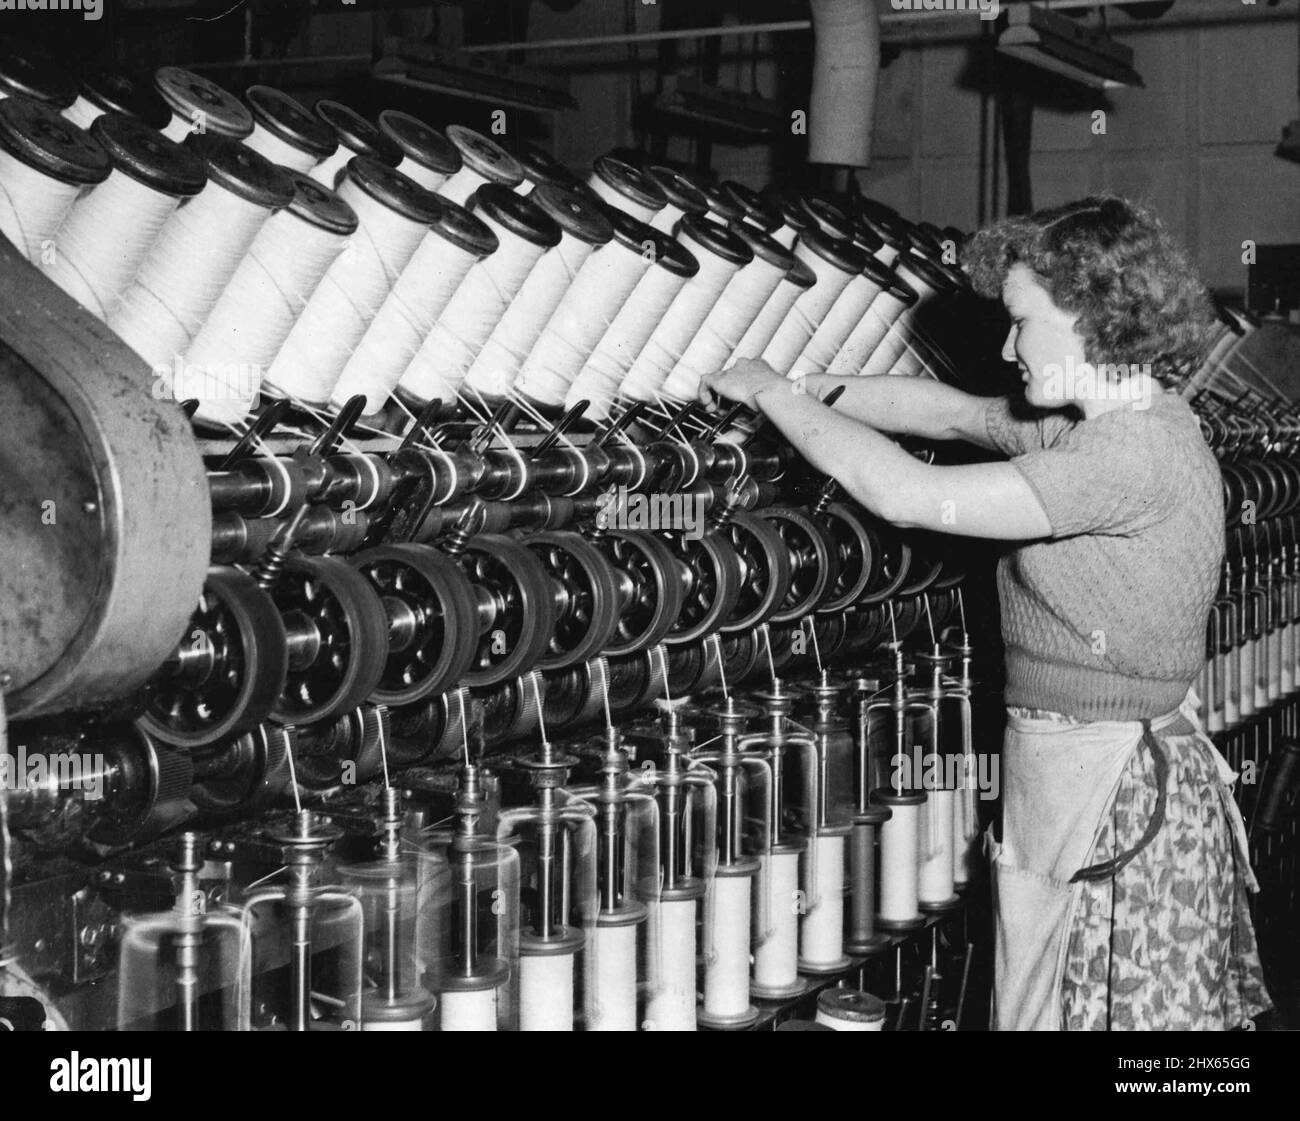 Sheep Supp. - At John Vicars Pty Ltd Marrickville. The roving operation in the drawing dept. Here the operator is fitting a full spool in the machine which draws the combed wool into fine slivers ready for spinning. May 28, 1952. (Photo by Frank Albert Charles Burke/Fairfax Media). Stock Photo